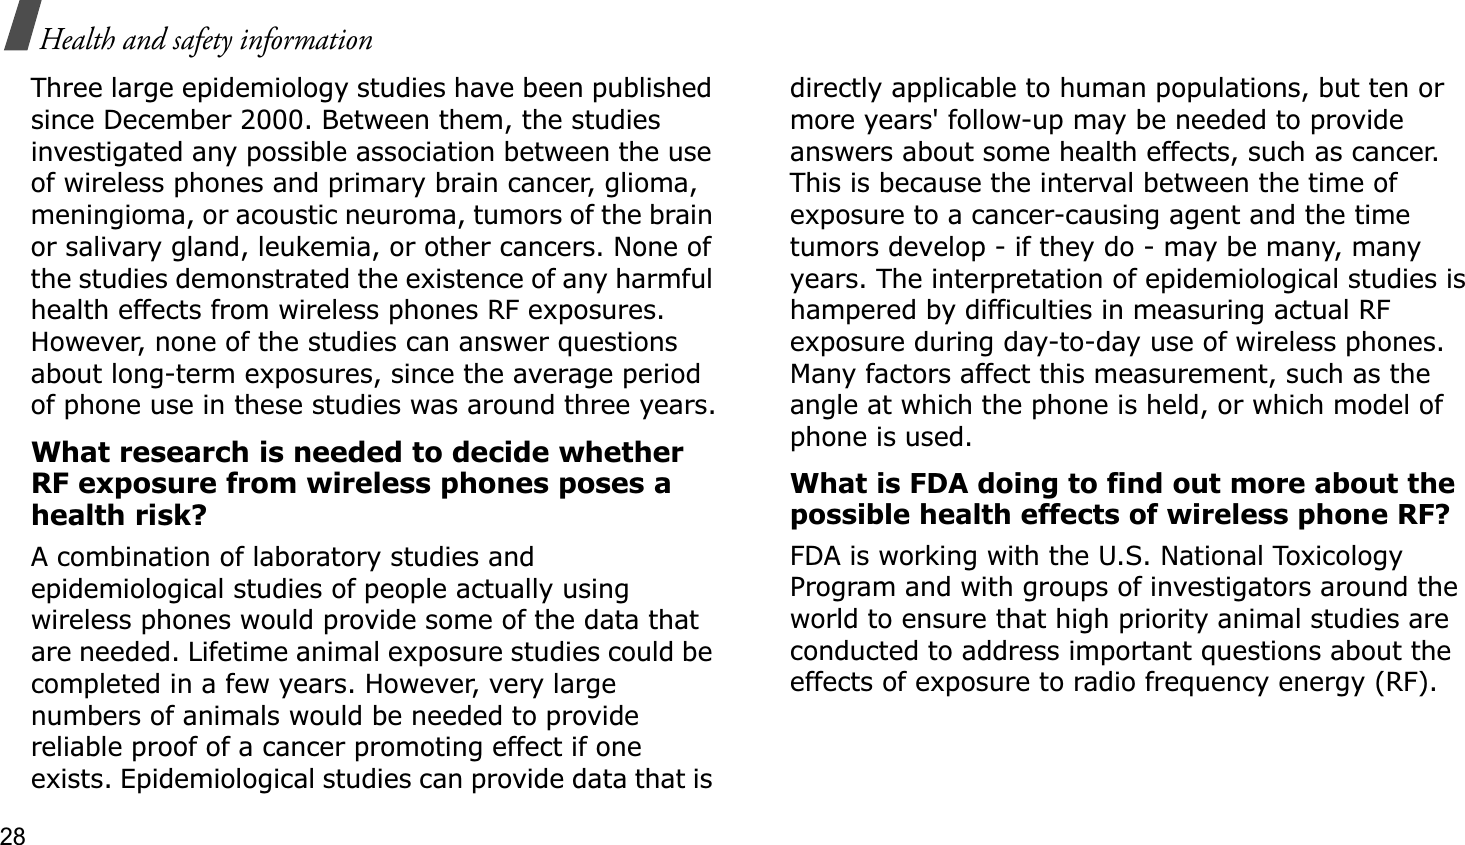 28Health and safety informationThree large epidemiology studies have been published since December 2000. Between them, the studies investigated any possible association between the use of wireless phones and primary brain cancer, glioma, meningioma, or acoustic neuroma, tumors of the brain or salivary gland, leukemia, or other cancers. None of the studies demonstrated the existence of any harmful health effects from wireless phones RF exposures. However, none of the studies can answer questions about long-term exposures, since the average period of phone use in these studies was around three years.What research is needed to decide whether RF exposure from wireless phones poses a health risk?A combination of laboratory studies and epidemiological studies of people actually using wireless phones would provide some of the data that are needed. Lifetime animal exposure studies could be completed in a few years. However, very large numbers of animals would be needed to provide reliable proof of a cancer promoting effect if one exists. Epidemiological studies can provide data that is directly applicable to human populations, but ten or more years&apos; follow-up may be needed to provide answers about some health effects, such as cancer. This is because the interval between the time of exposure to a cancer-causing agent and the time tumors develop - if they do - may be many, many years. The interpretation of epidemiological studies is hampered by difficulties in measuring actual RF exposure during day-to-day use of wireless phones. Many factors affect this measurement, such as the angle at which the phone is held, or which model of phone is used.What is FDA doing to find out more about the possible health effects of wireless phone RF?FDA is working with the U.S. National Toxicology Program and with groups of investigators around the world to ensure that high priority animal studies are conducted to address important questions about the effects of exposure to radio frequency energy (RF).